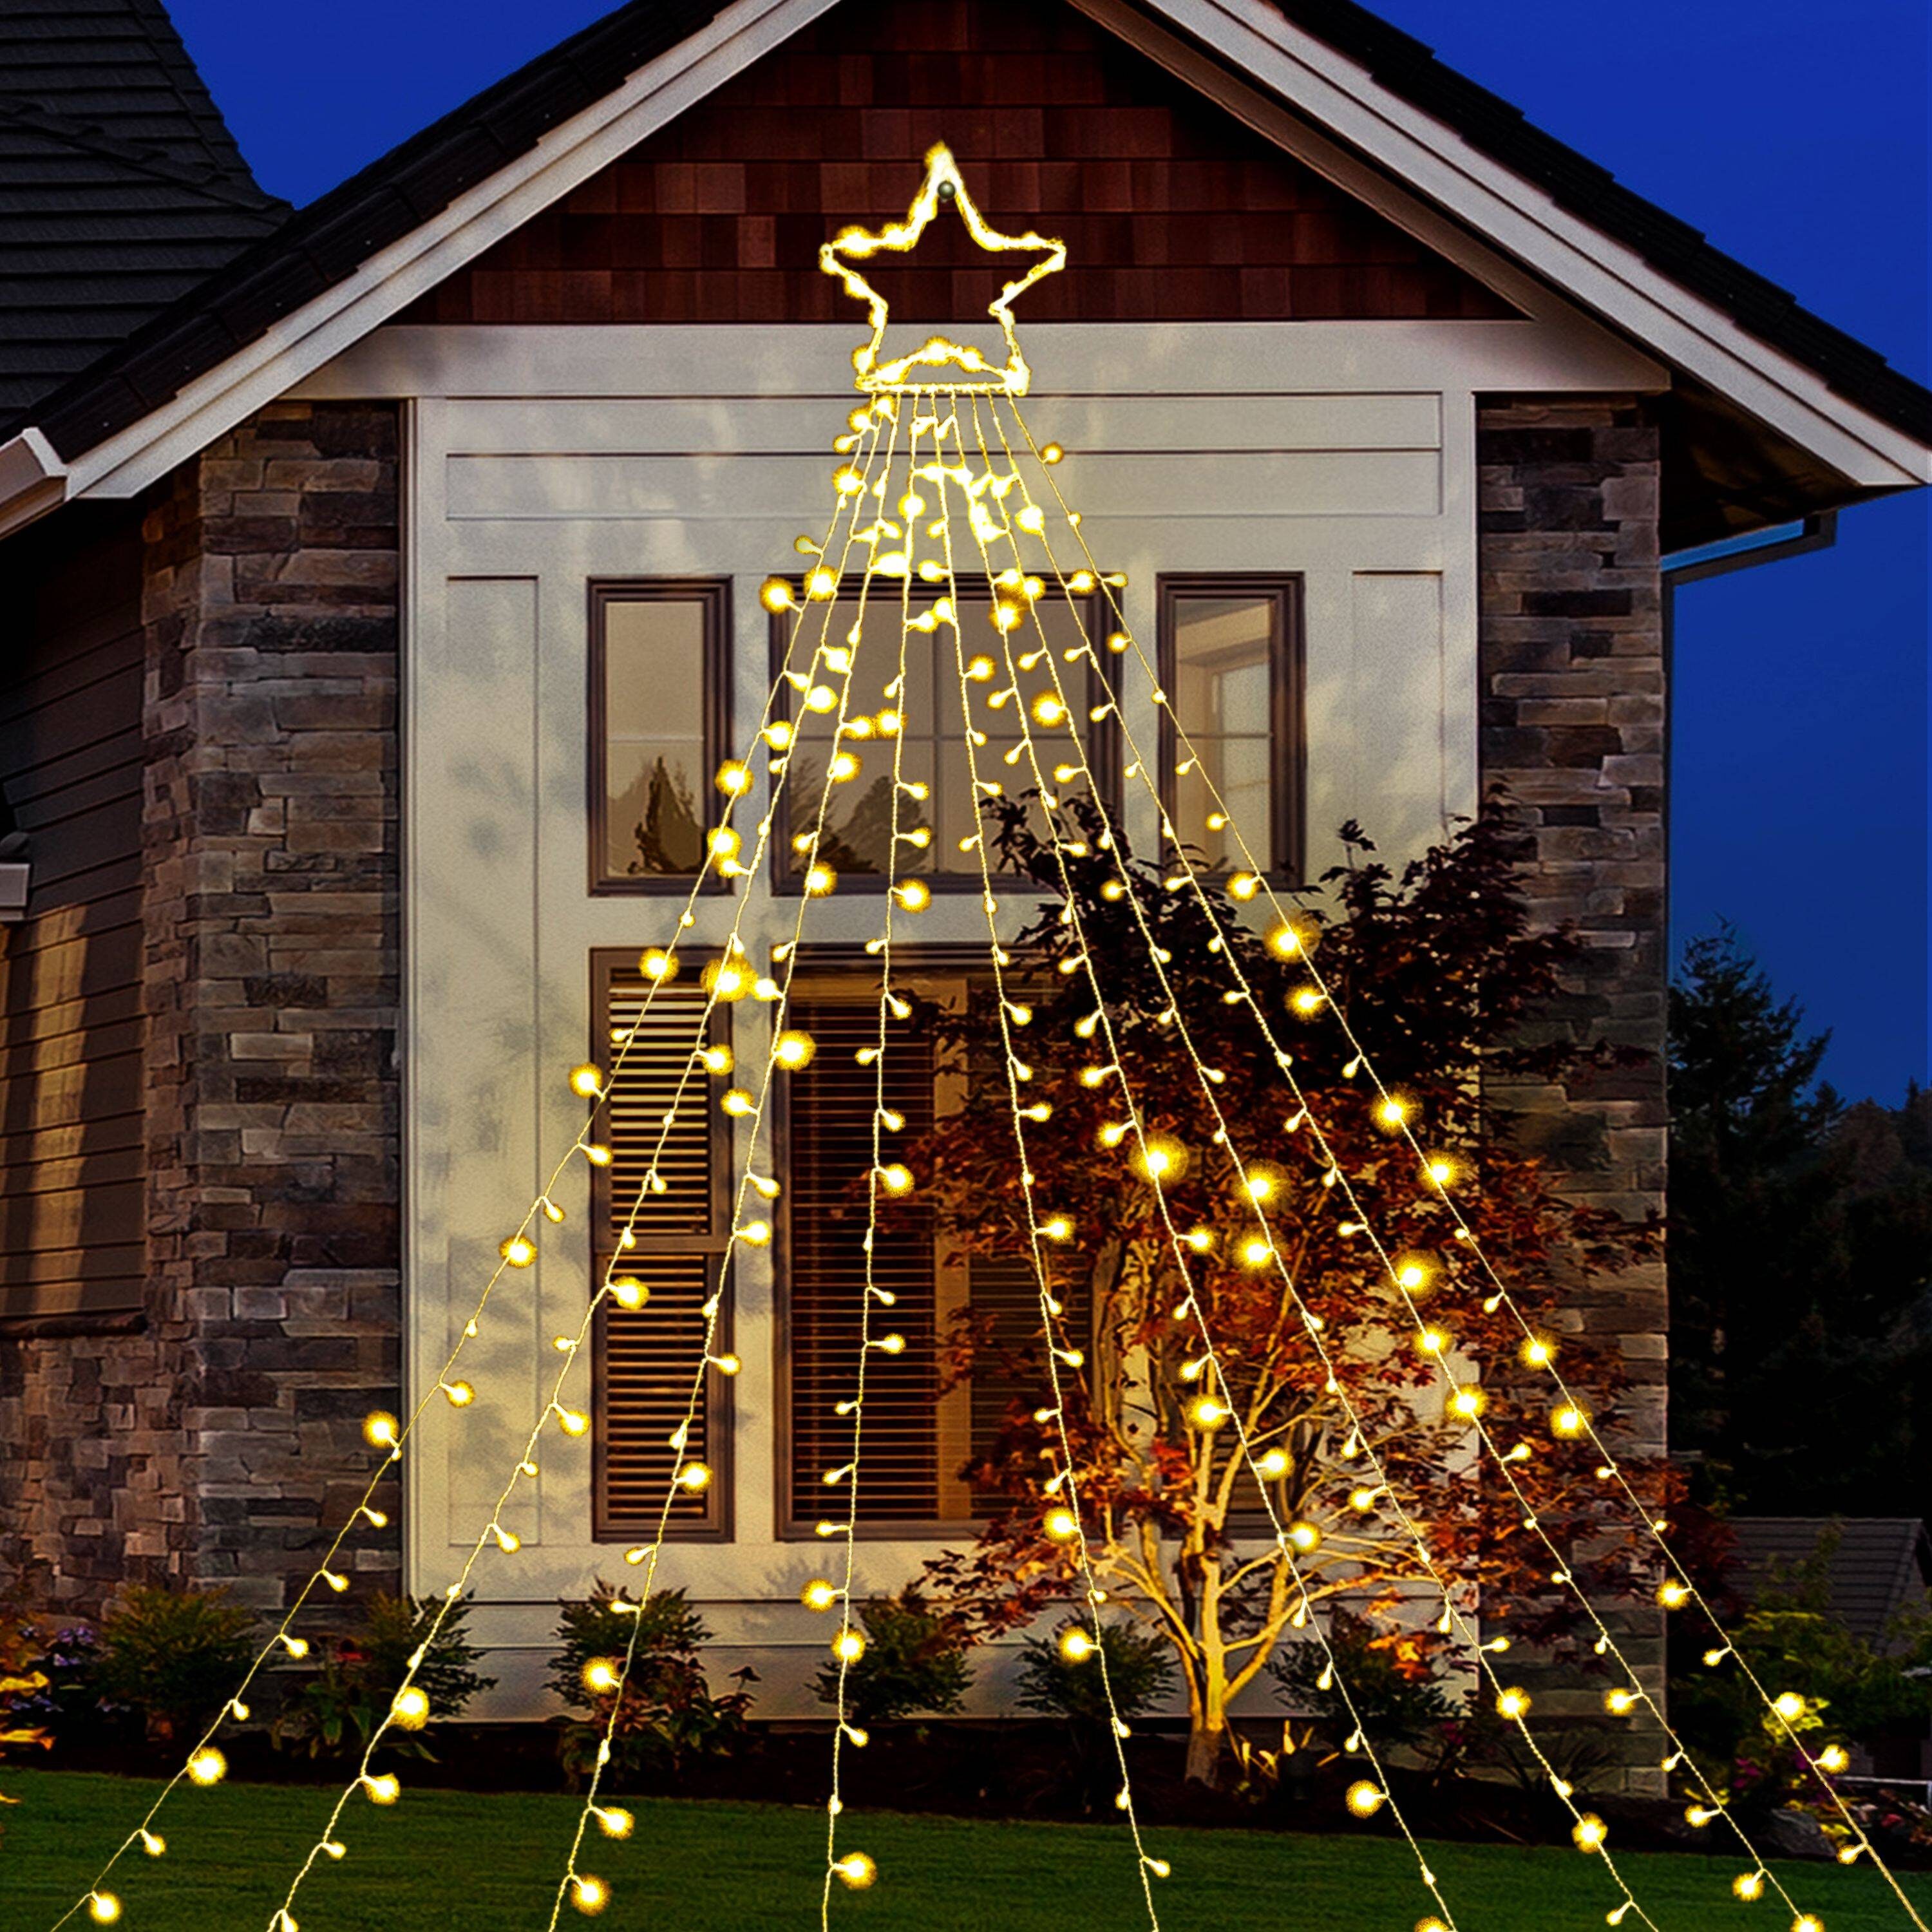 Joyin 12-in Star (Electrical Outlet Christmas Decor at Lowes.com